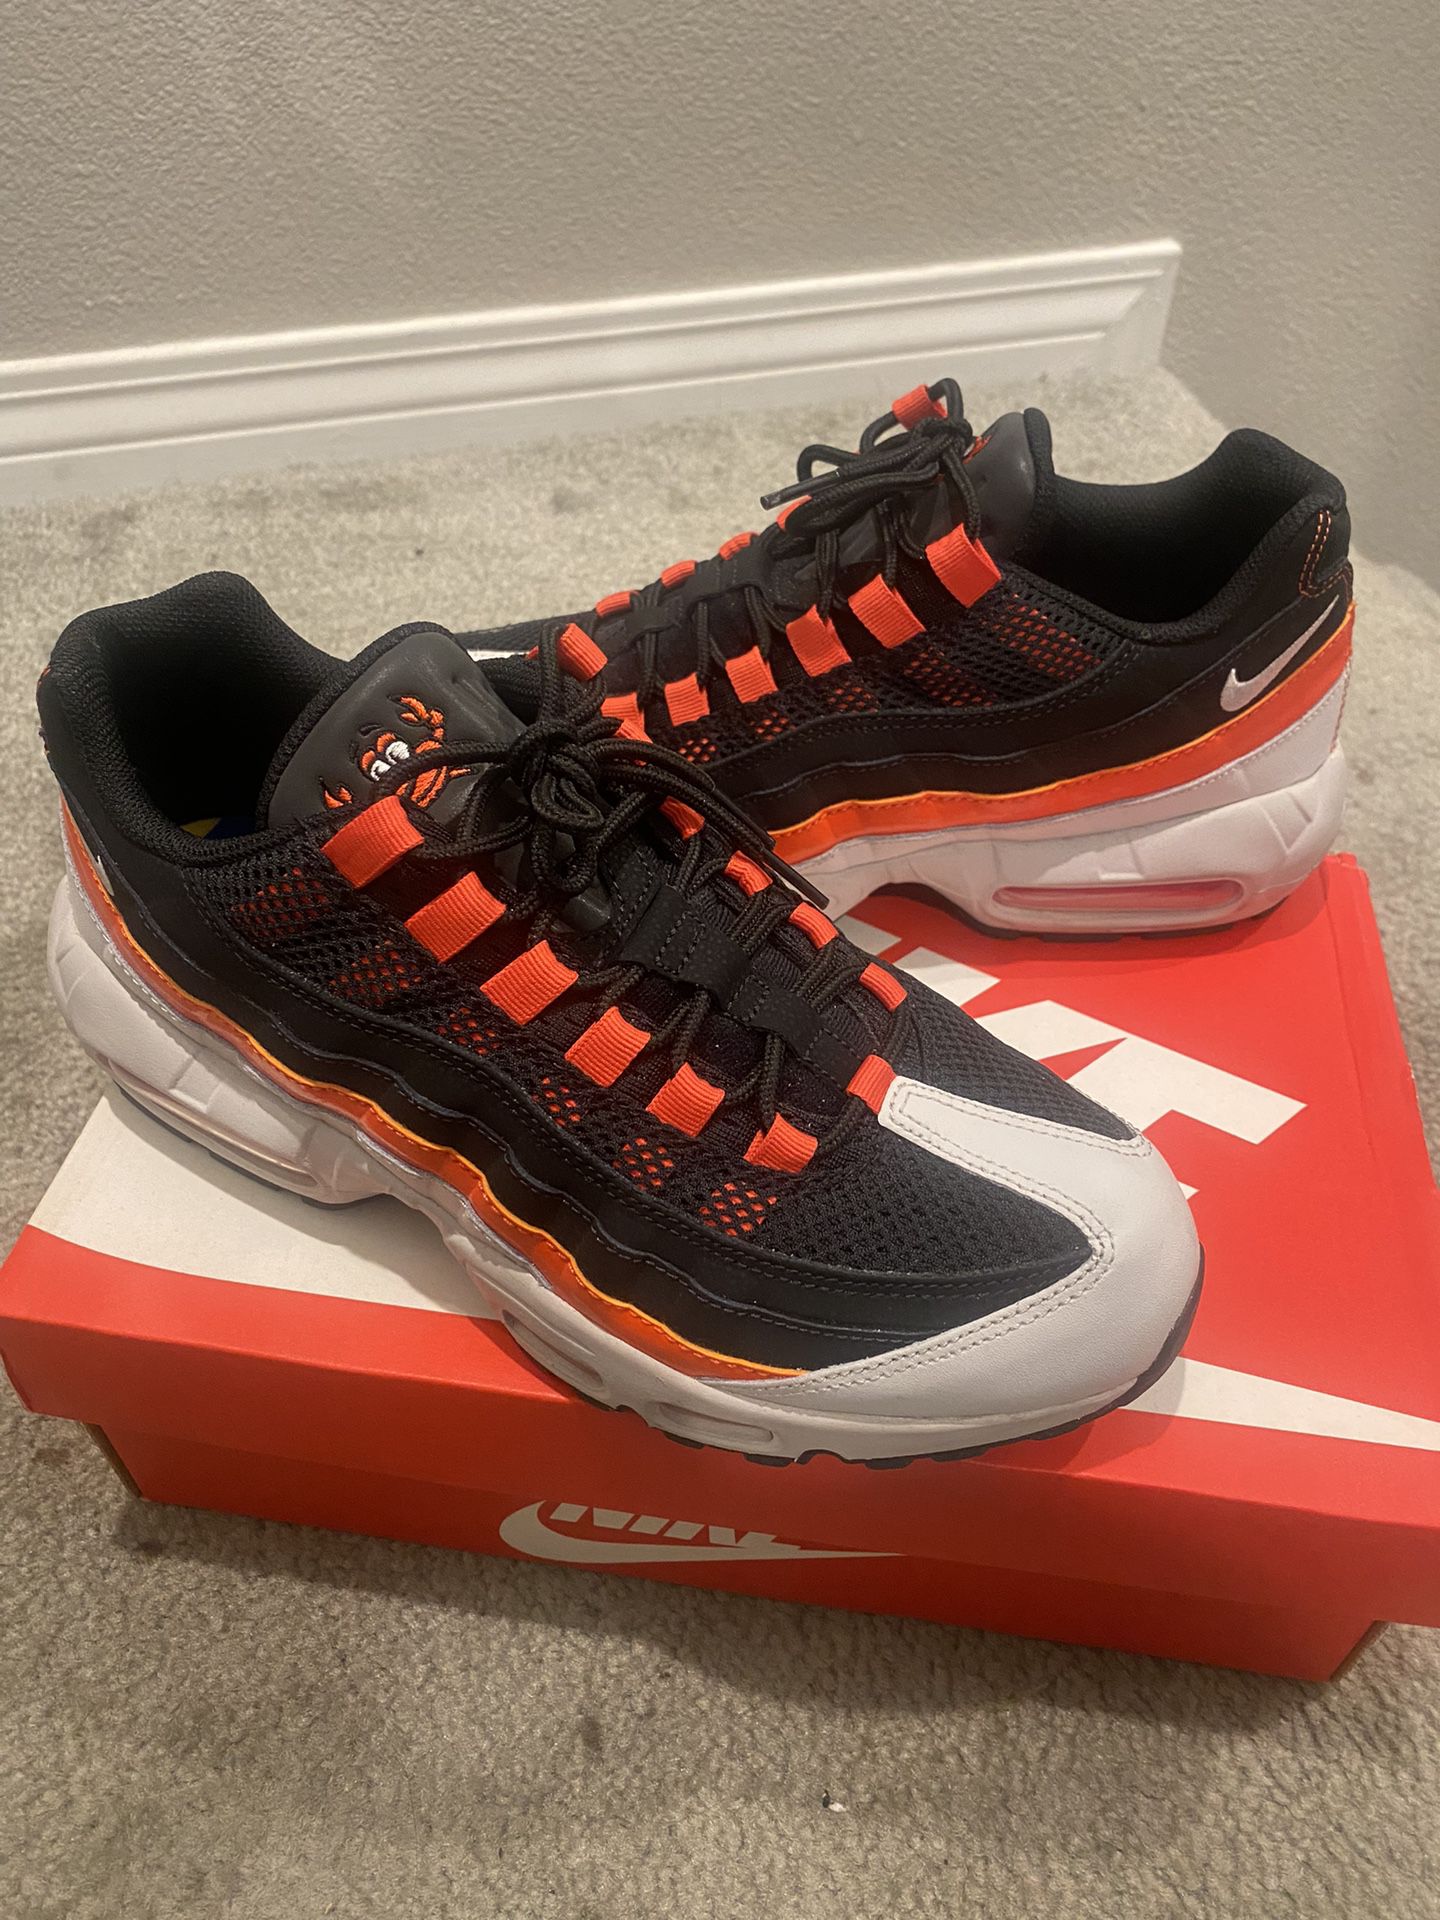 aeronave Portal once Nike Air Max 95 Crab Edition for Sale in Los Angeles, CA - OfferUp